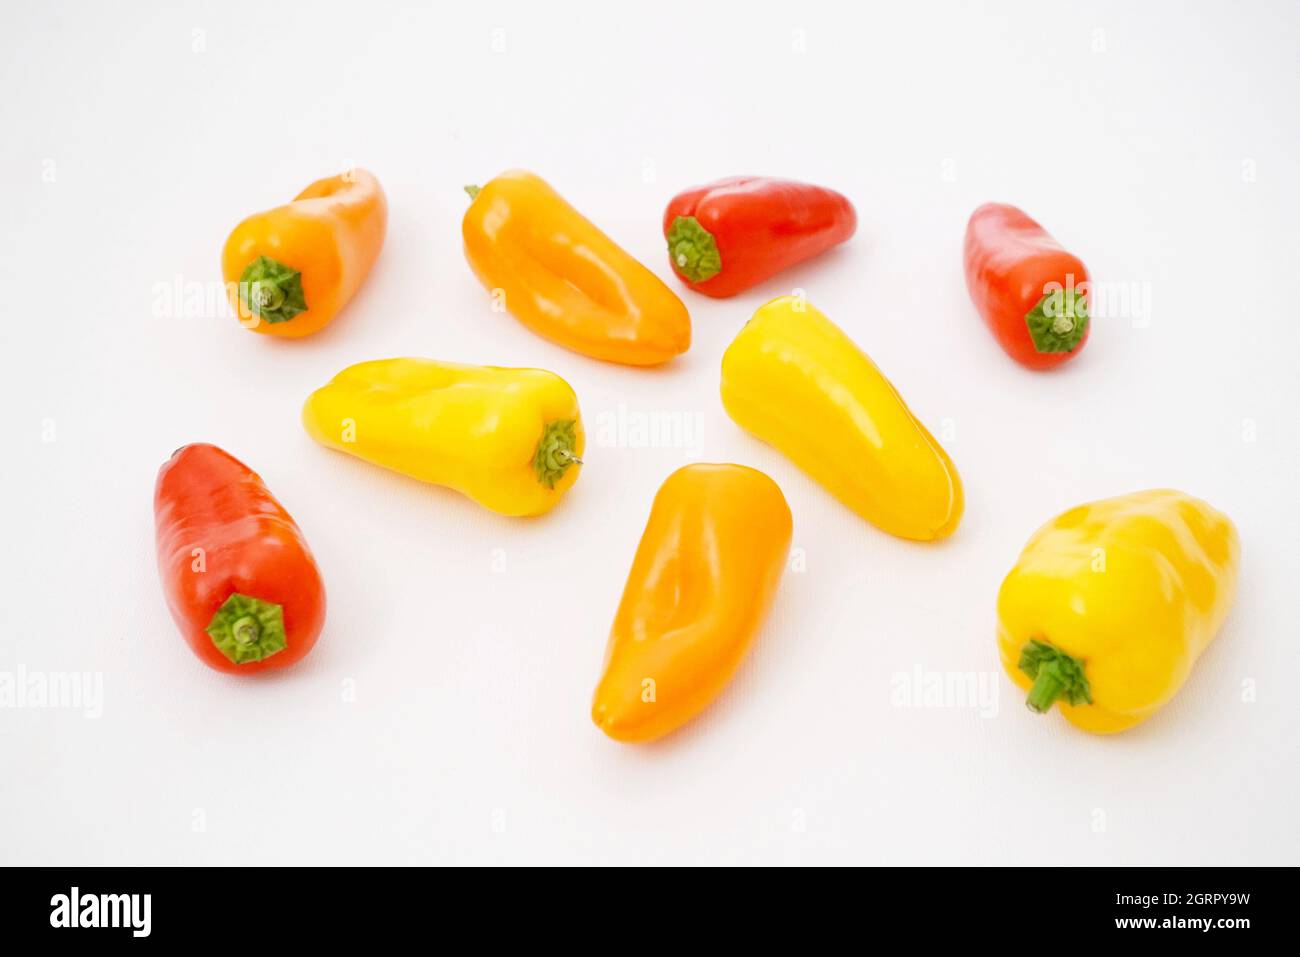 High Angle View Of Chili Peppers Against White Background Stock Photo